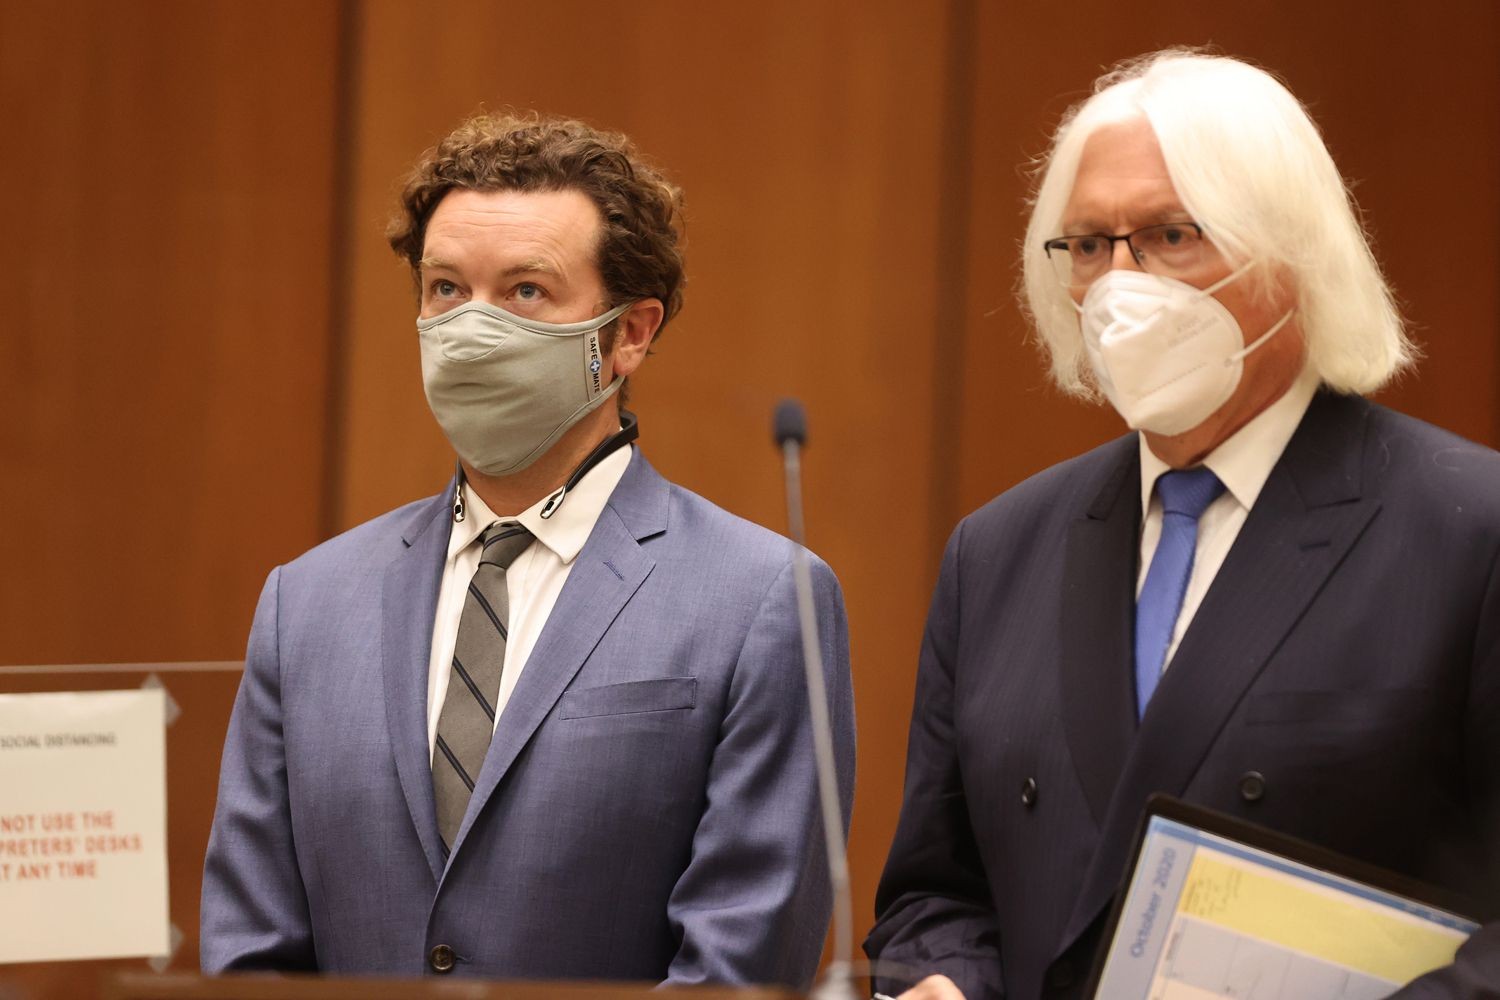 Danny Masterson convicted on 2 counts of r*pe